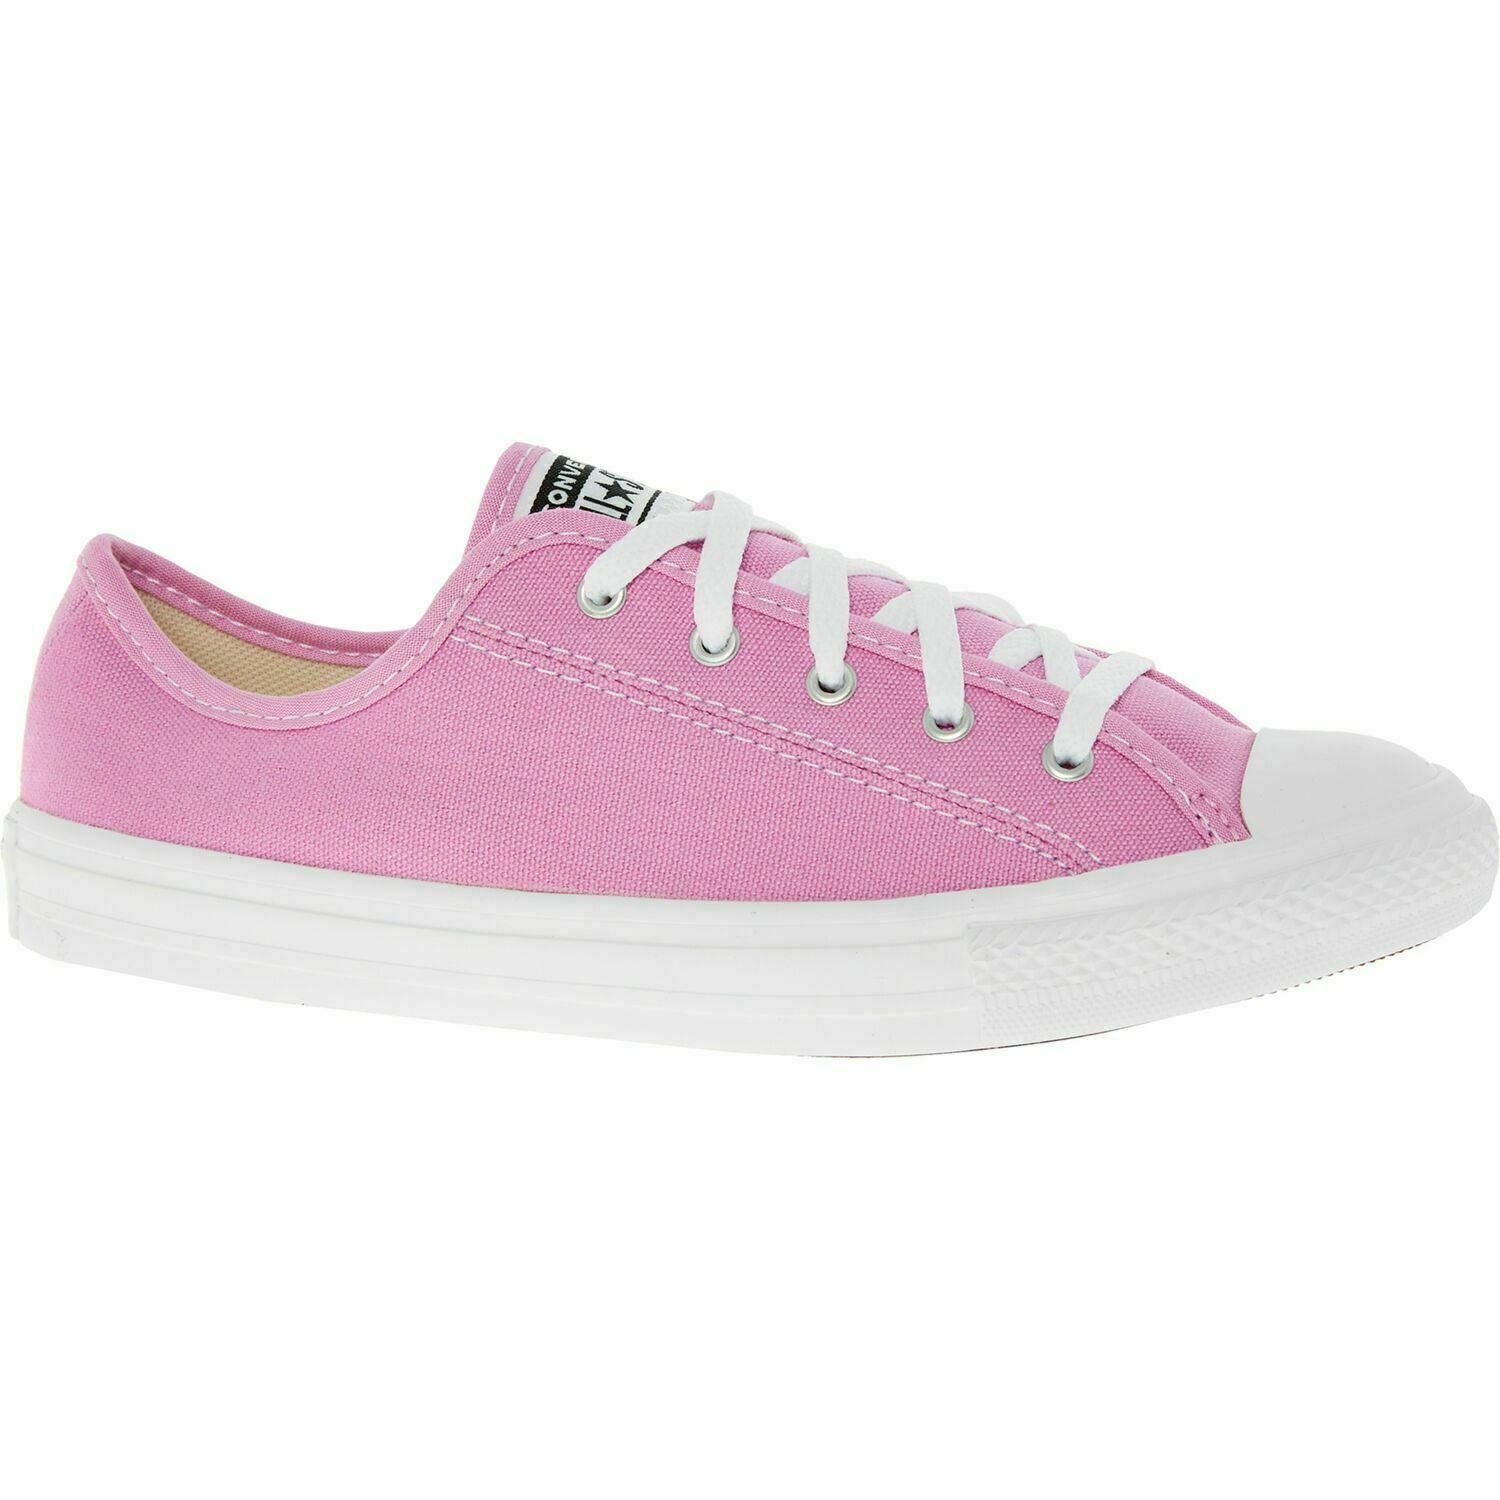 CONVERSE All Star Women's Canvas Trainers - Peony Pink/White, size UK 3 EU 35.5